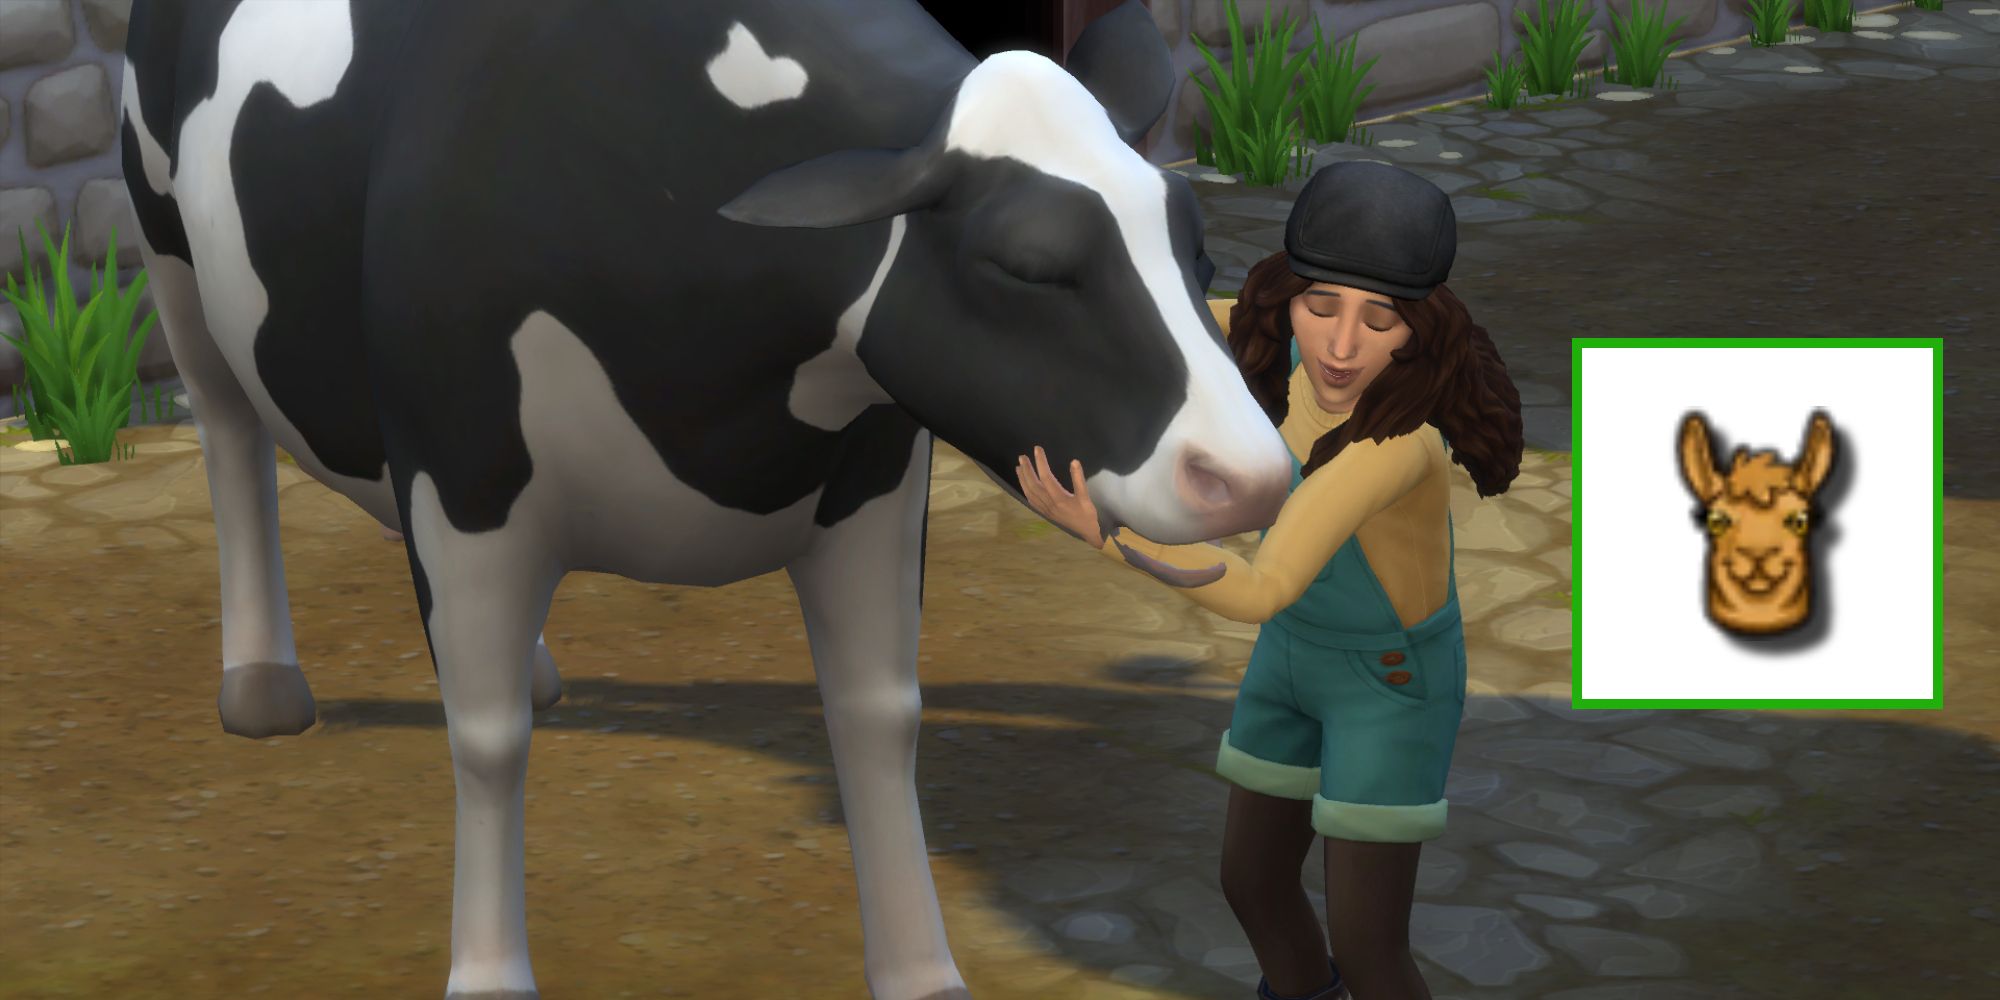 A Sim hugs a cow in The Sims 4 and the icon for the animal lover trait has been added to the photo